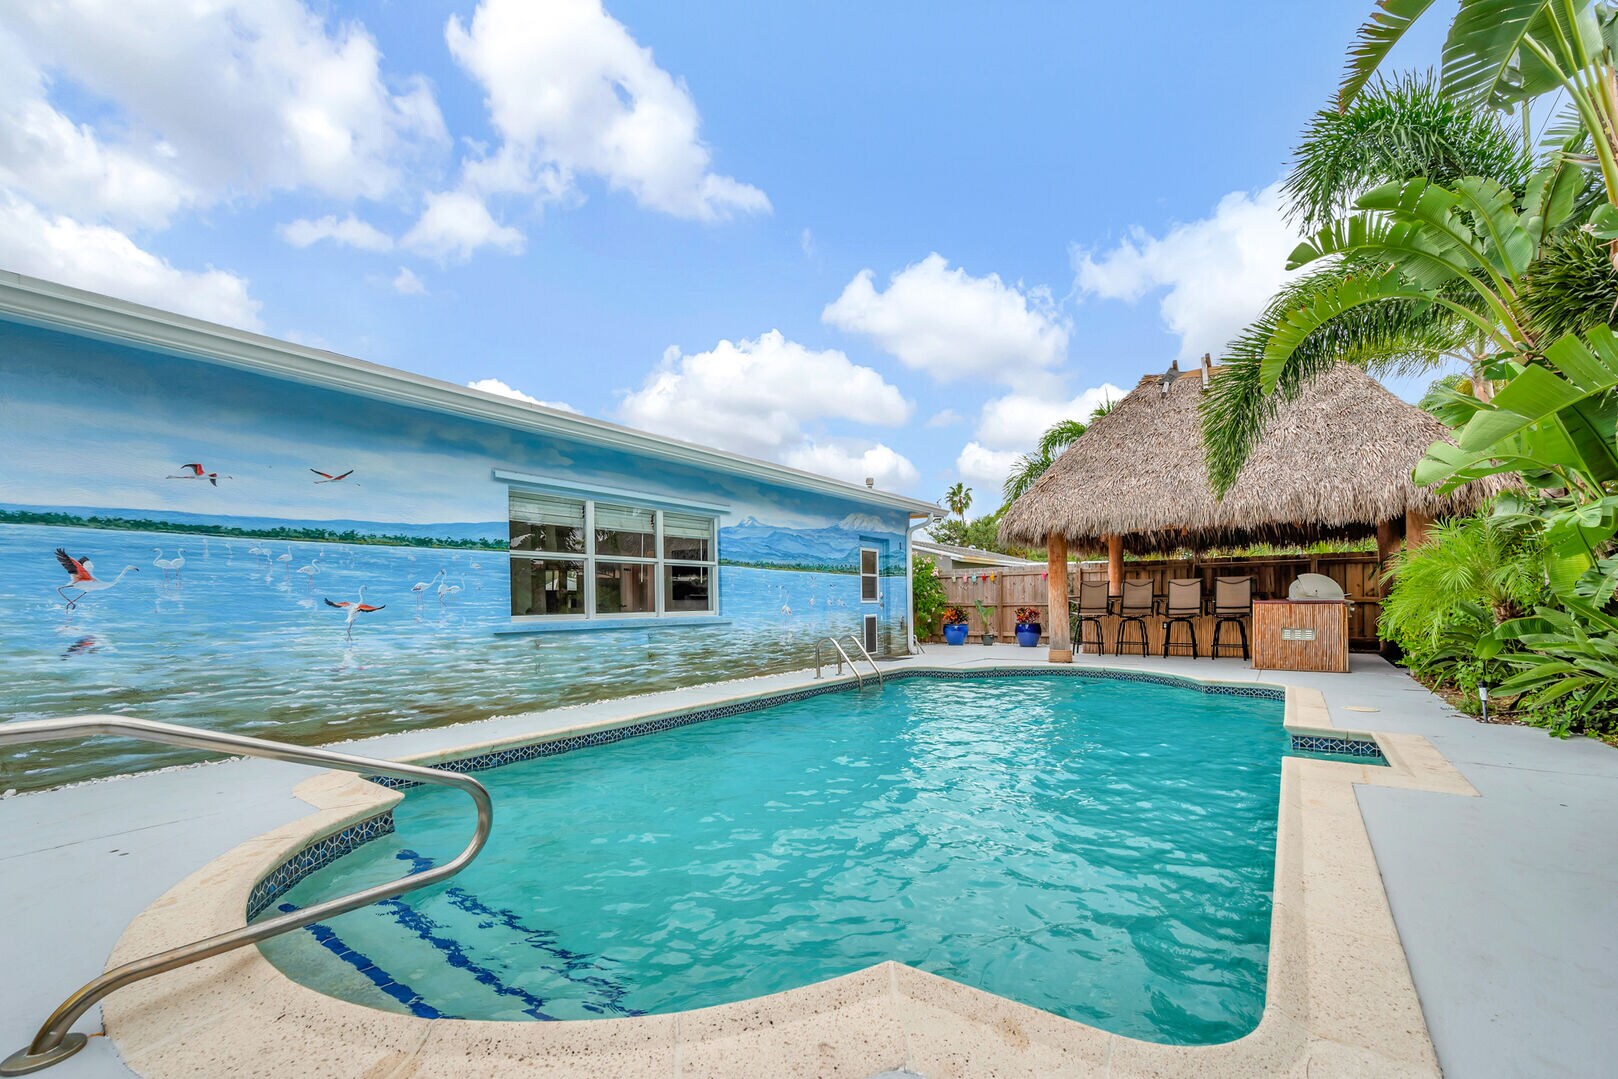 Heated pool is a good size, with Tiki hut Bar/dining area